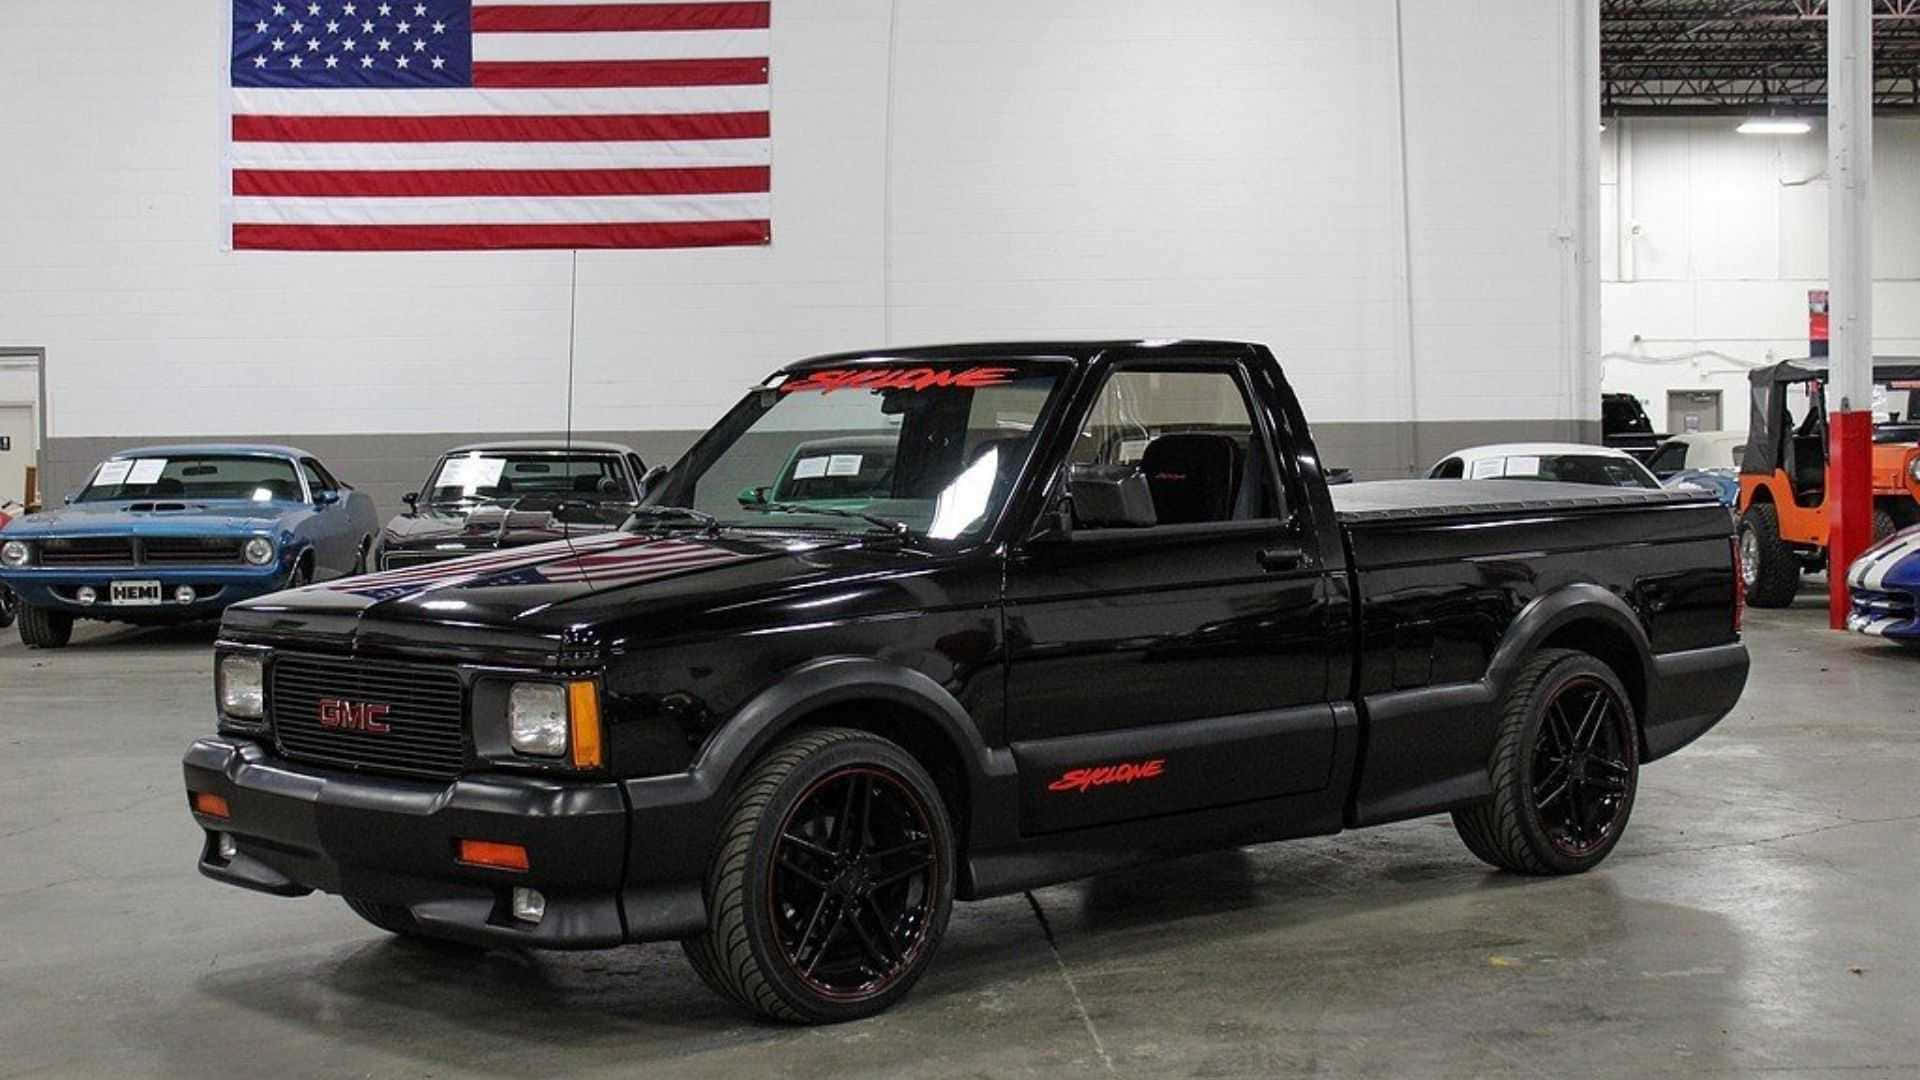 Stunning GMC Syclone in action Wallpaper